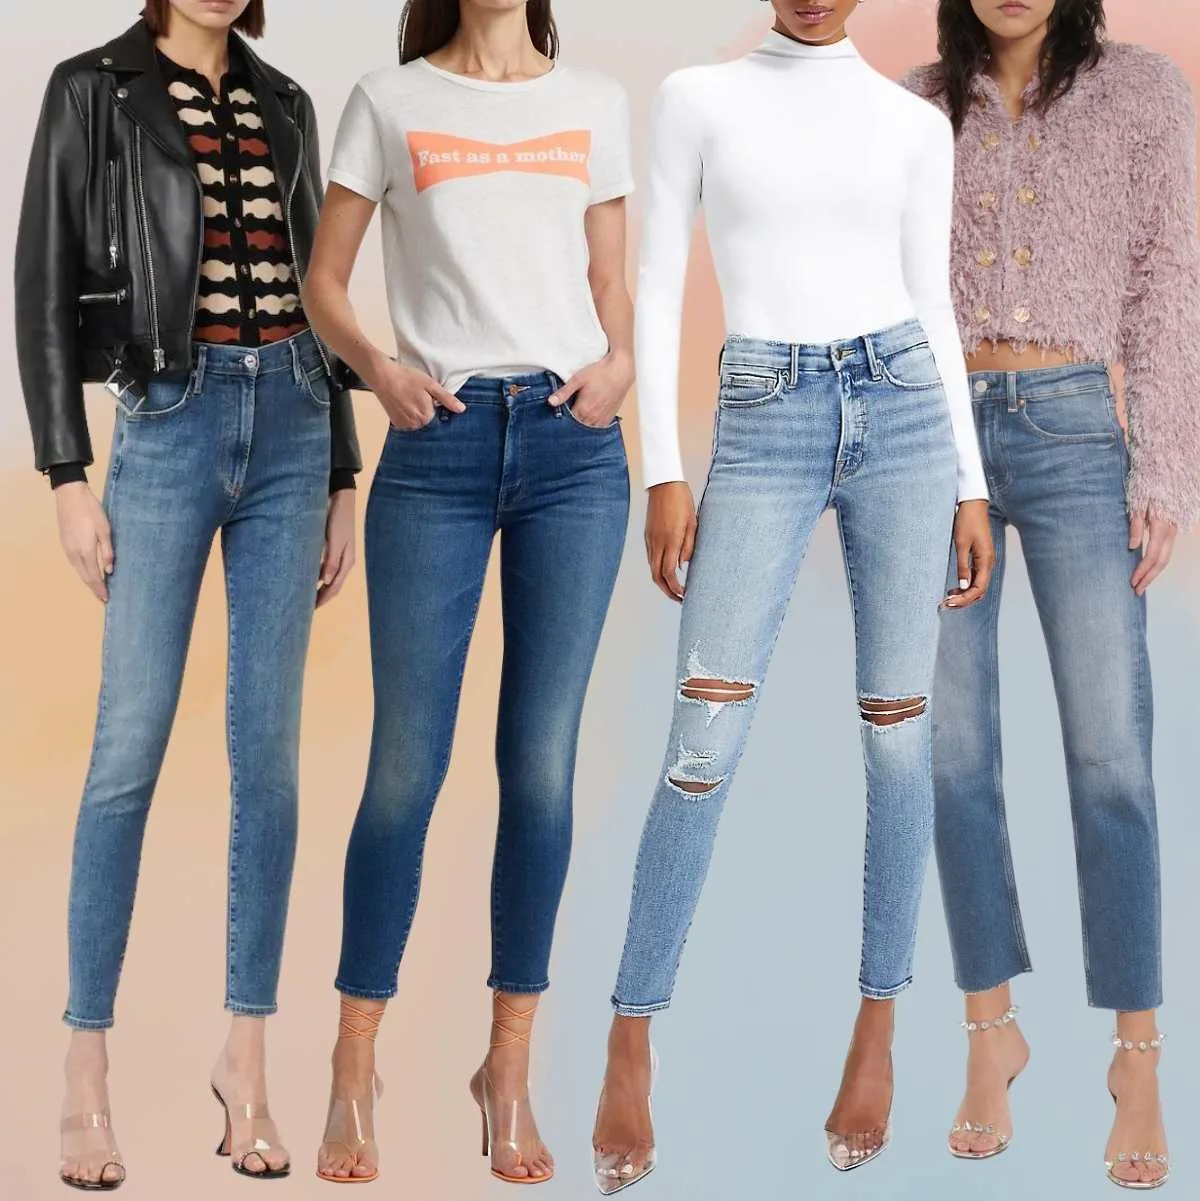 Curious What Shoes to Wear with Jeans Outfits? are 15!